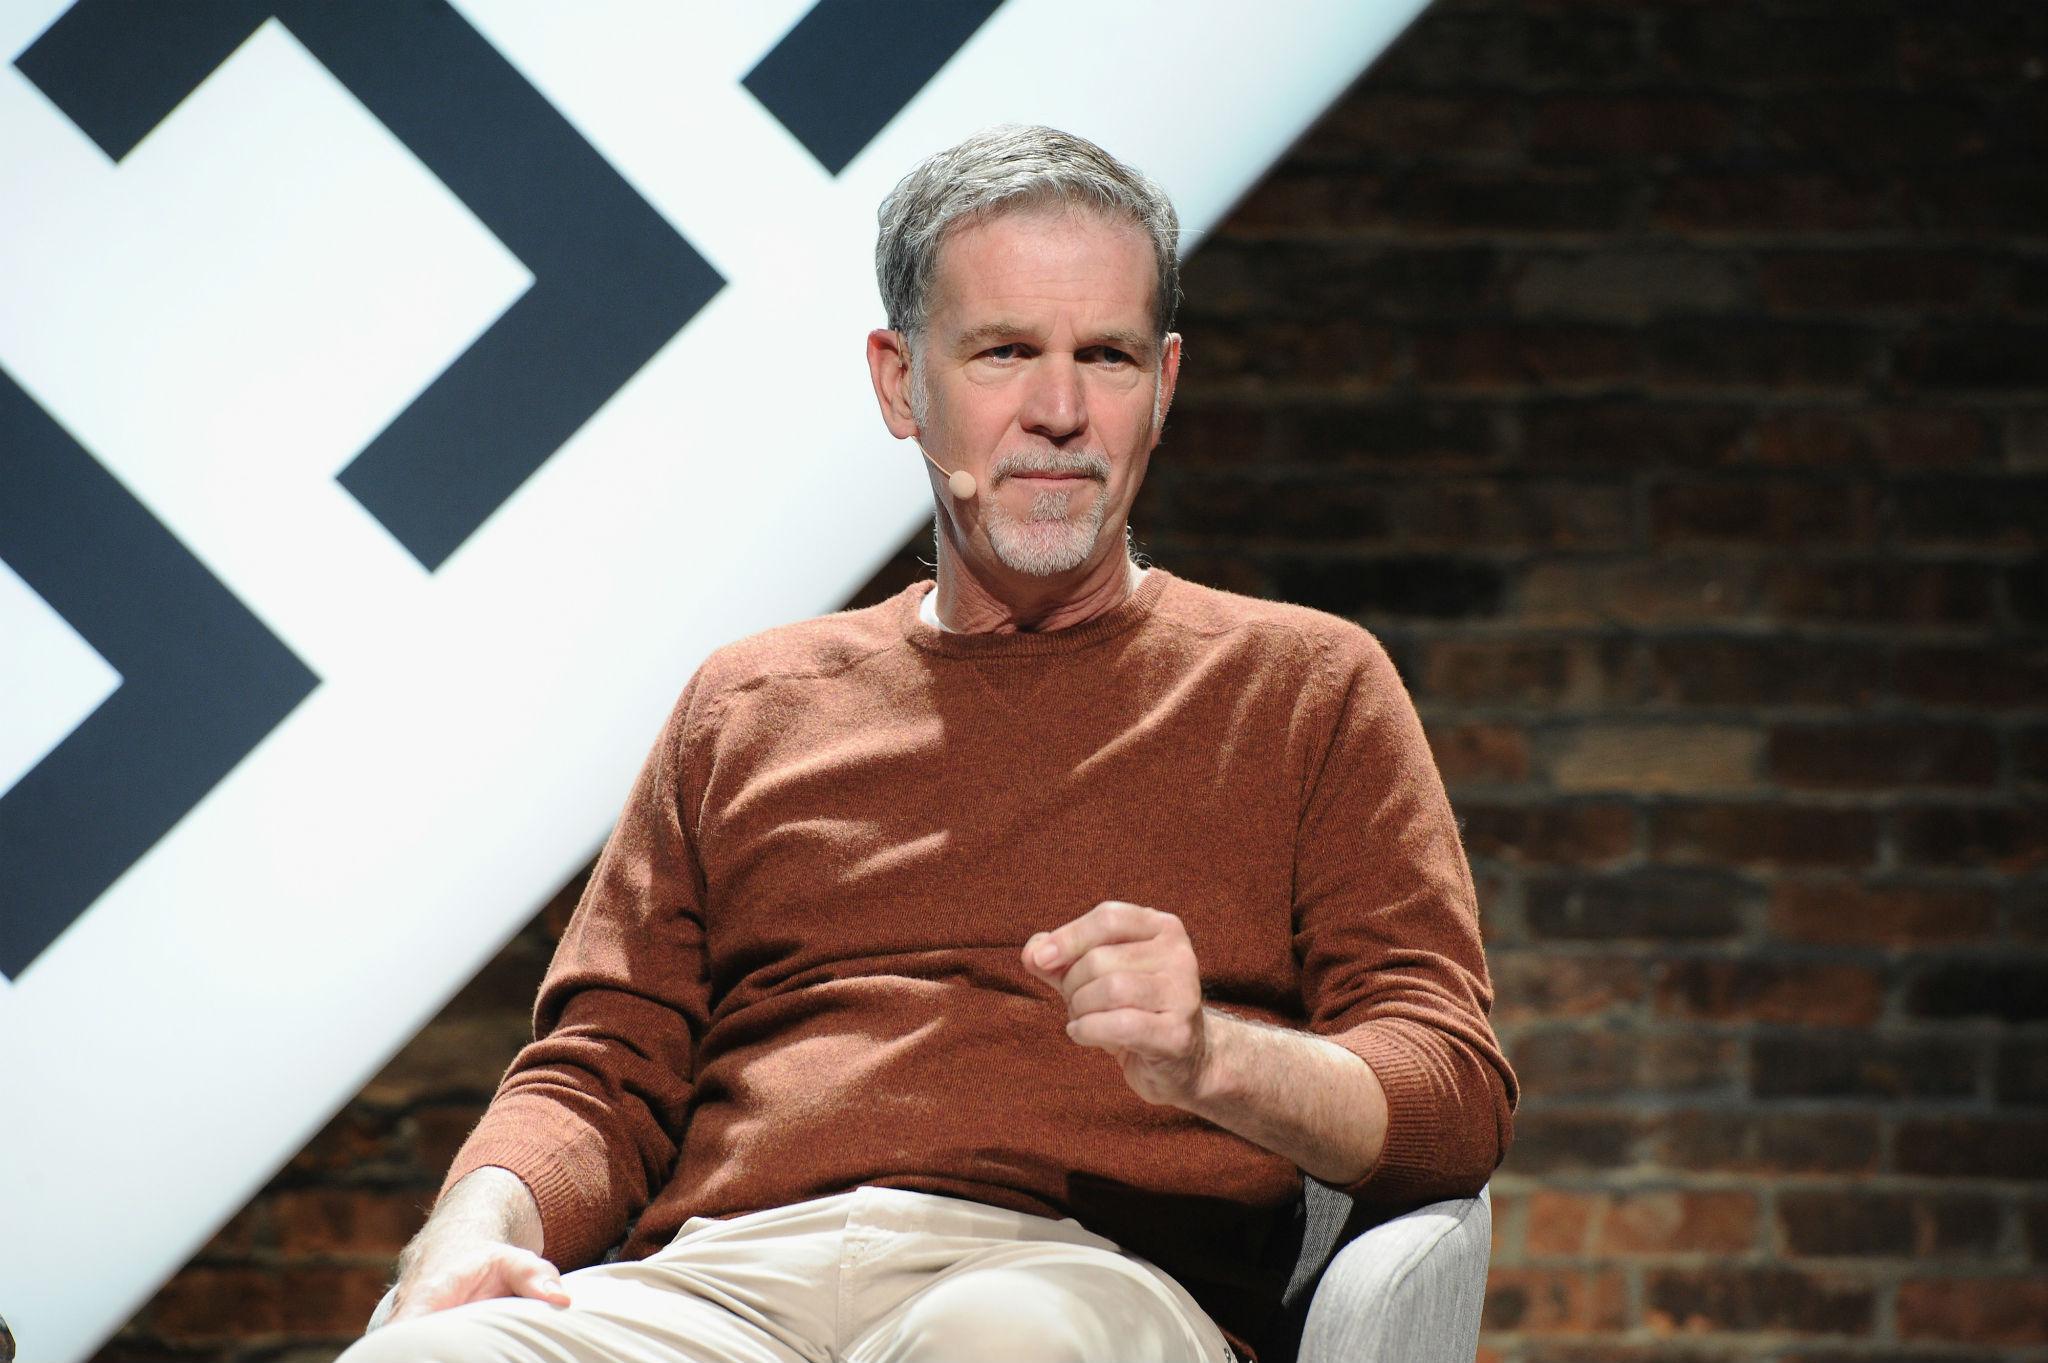 Co-founder and CEO of Netflix Reed Hastings speaks onstage during The New Yorker TechFest 2016 on 2 October 2016 in New York City